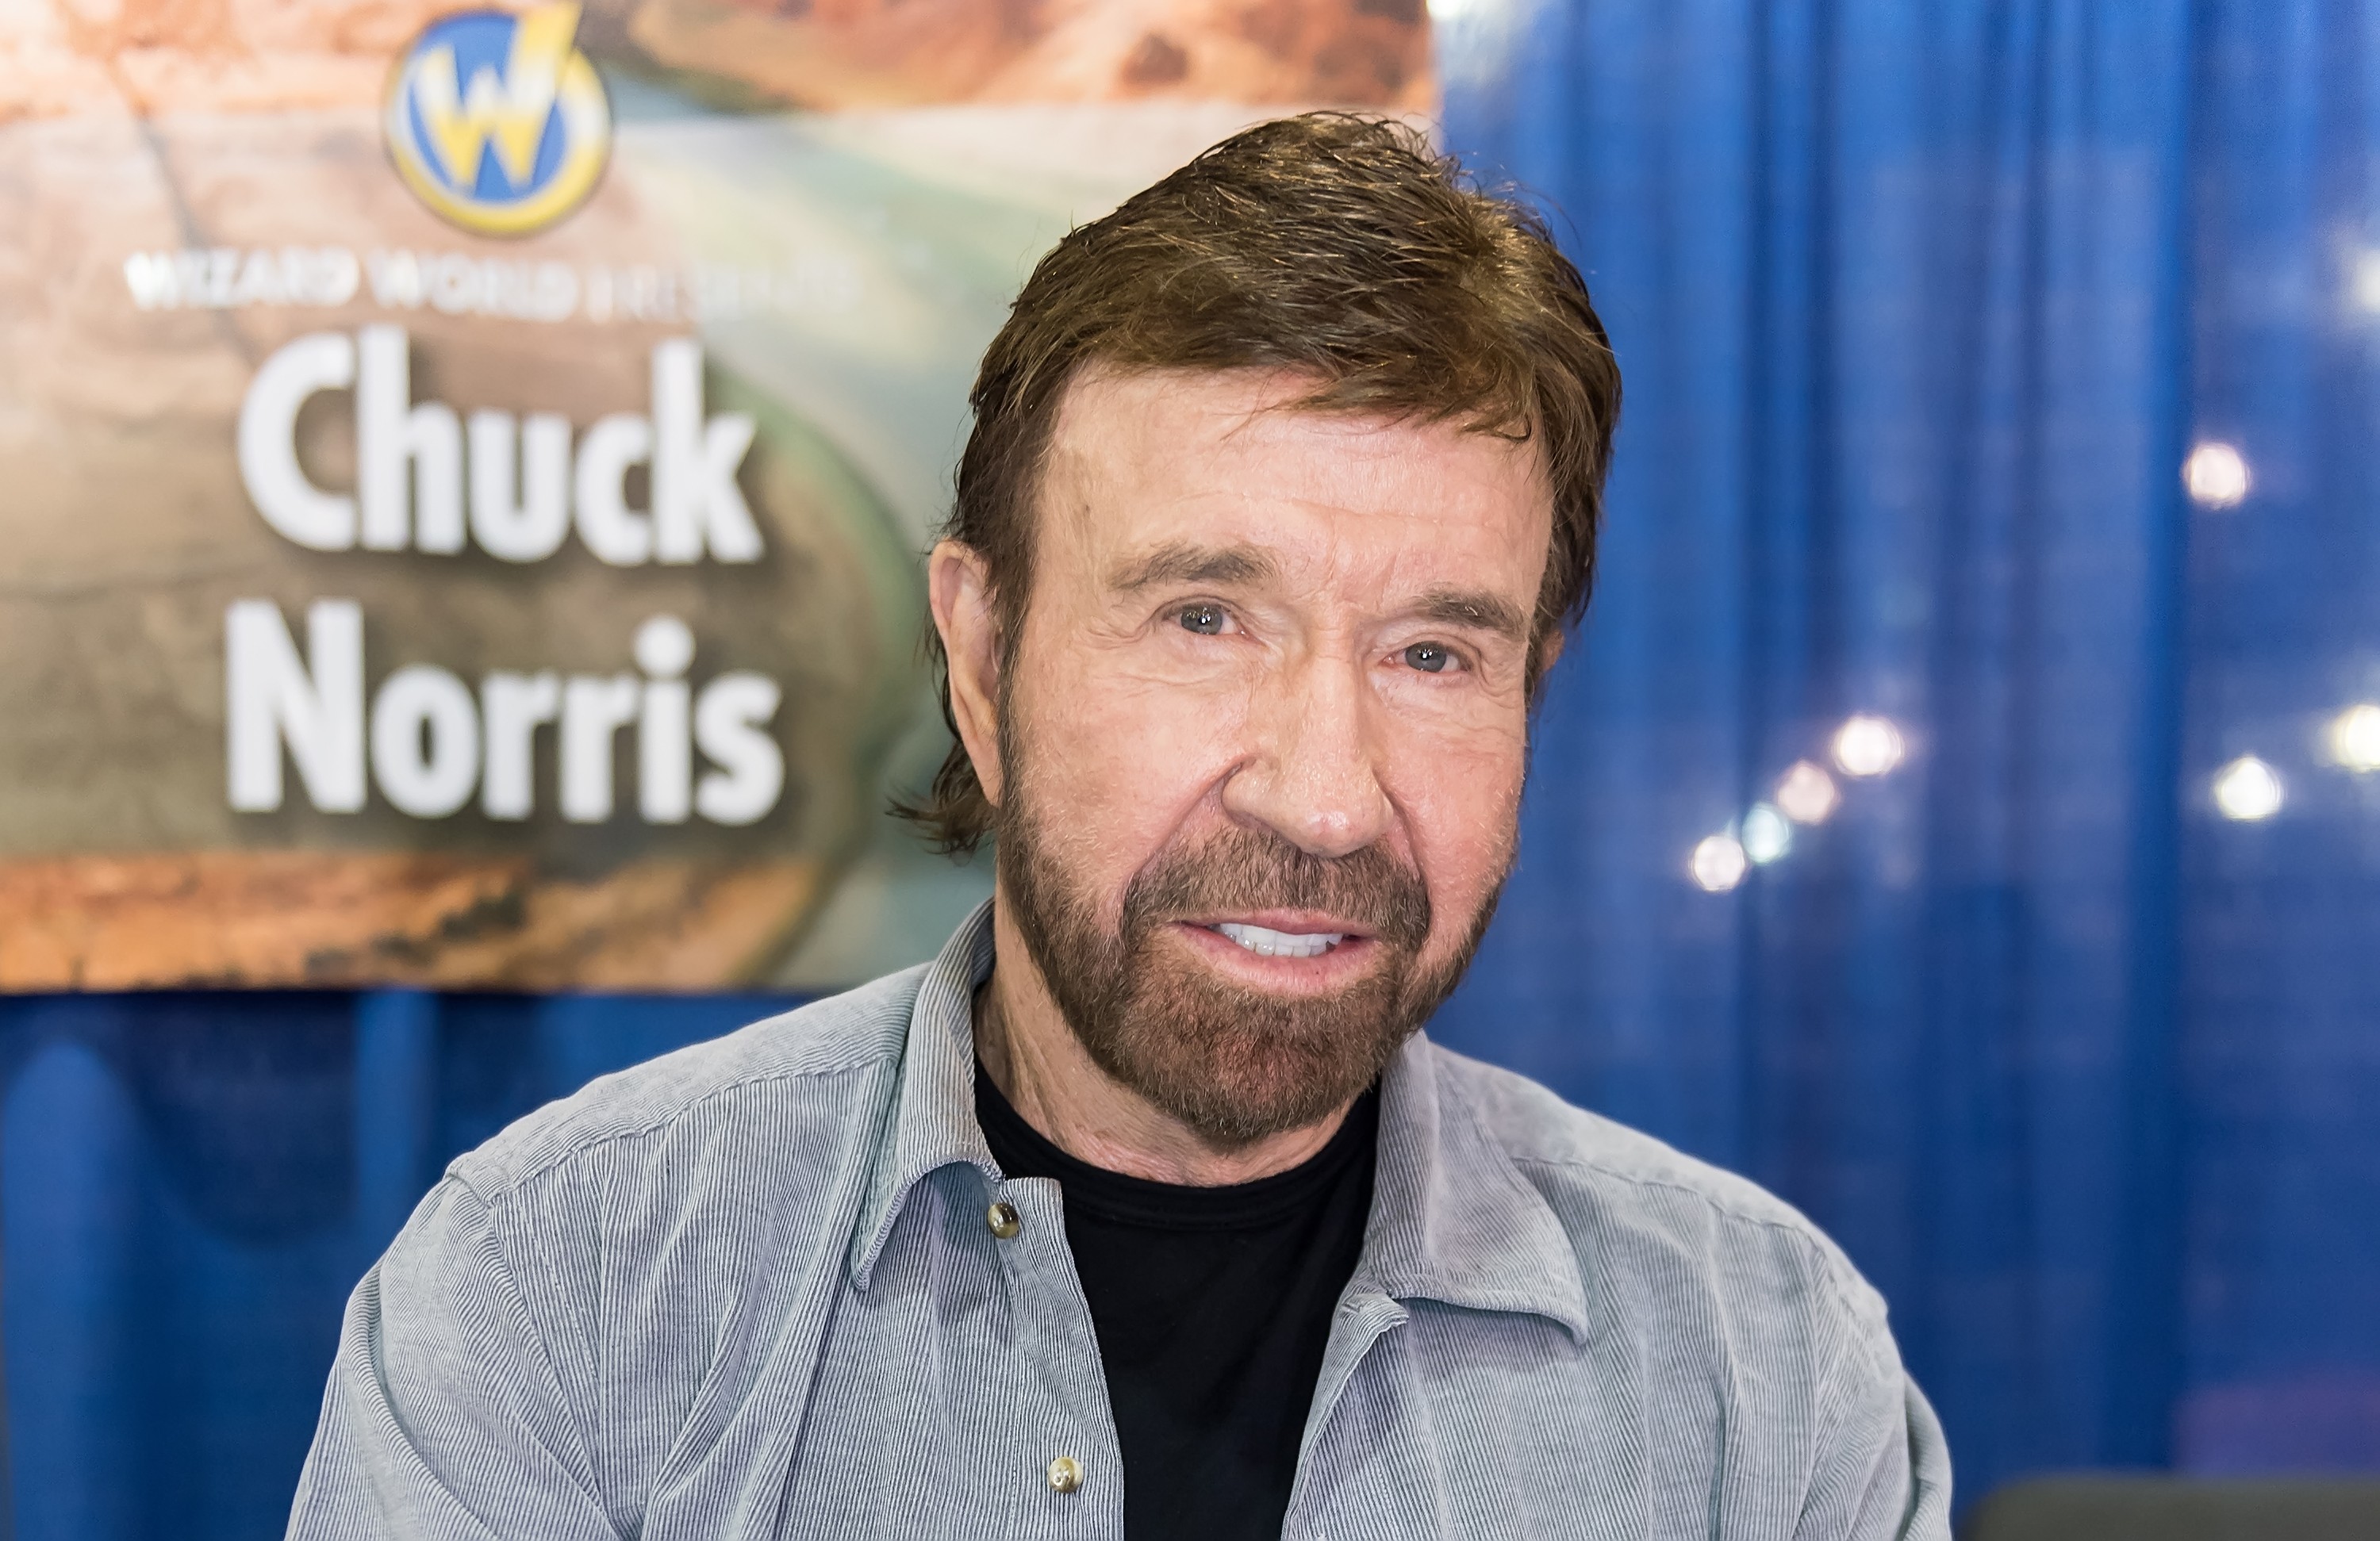 Chuck Norris (Foto: Getty Images)